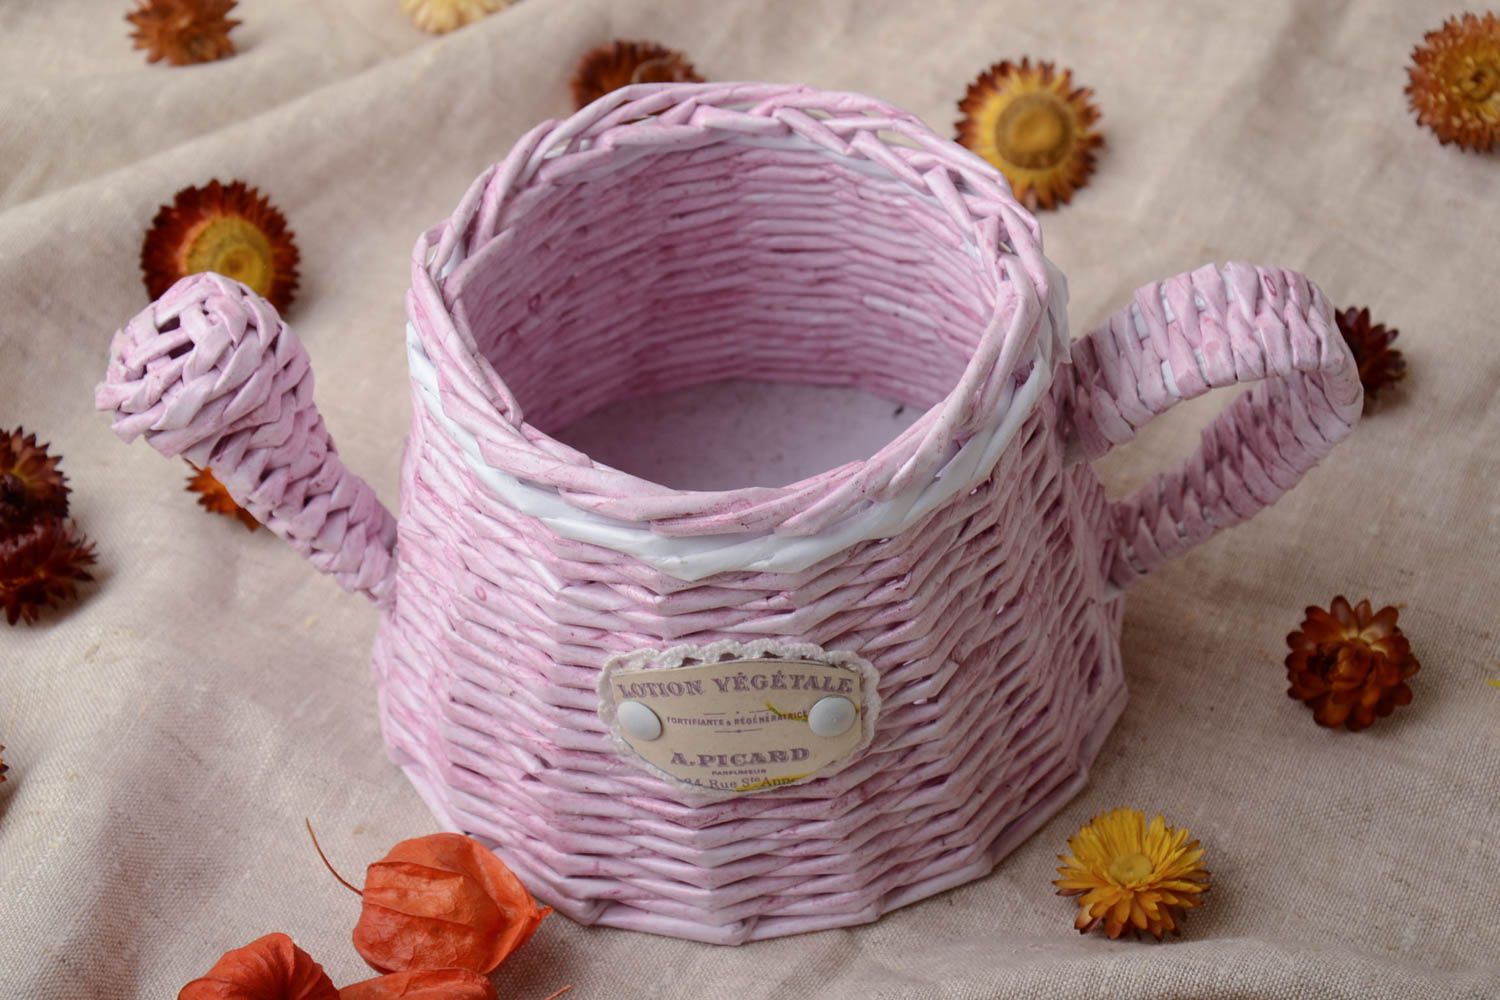 Decorative newspaper woven watering can photo 1